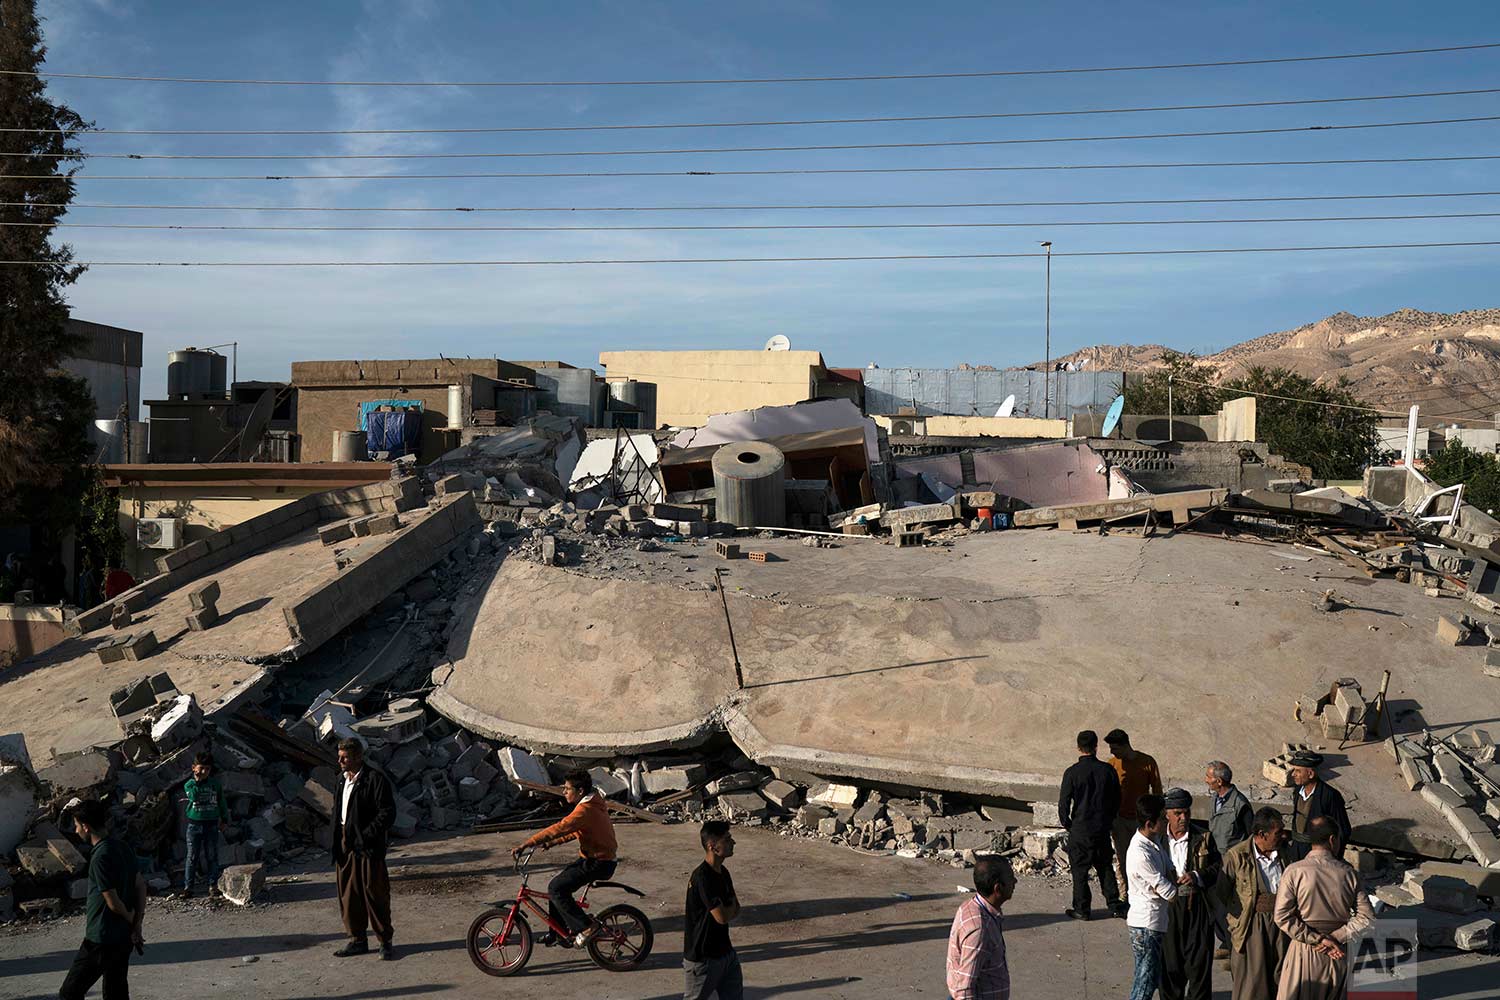  People walk next to a destroyed building after an earthquake in the city of Darbandikhan, northern Iraq, Monday, Nov. 13, 2017. (AP Photo/Felipe Dana) 